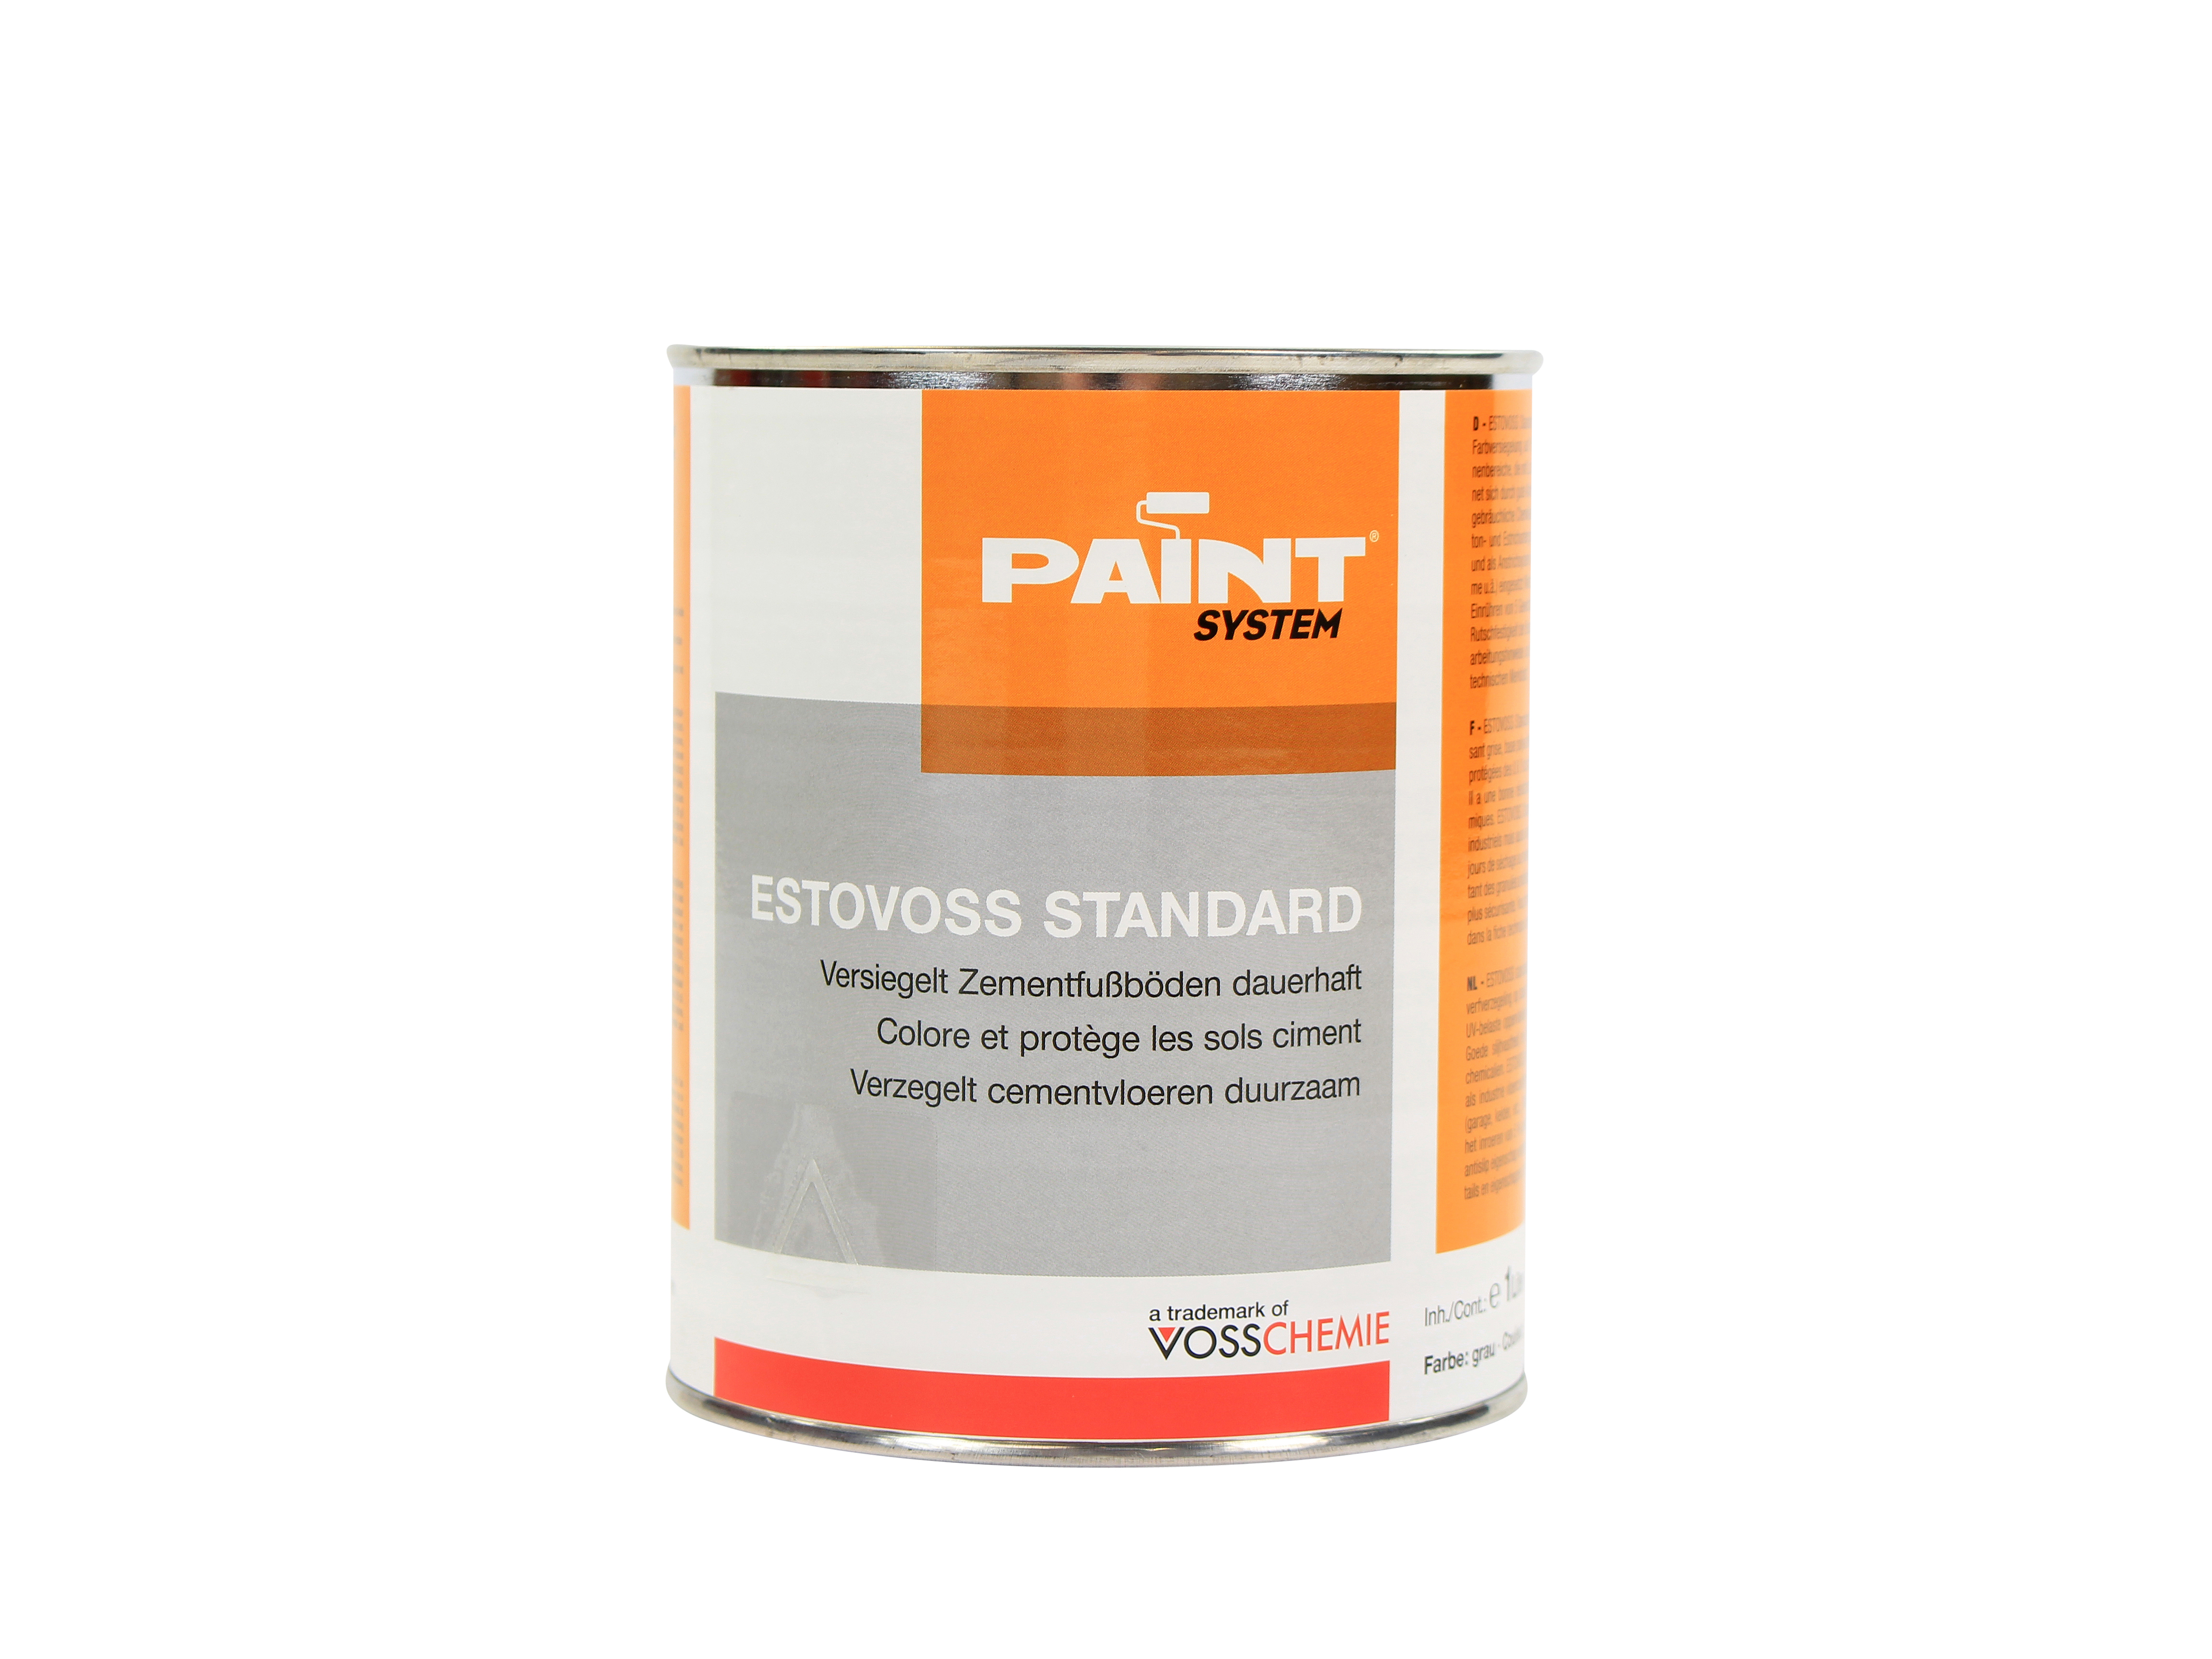 Floor paint - Waterproof topcoat for any surface 1 l